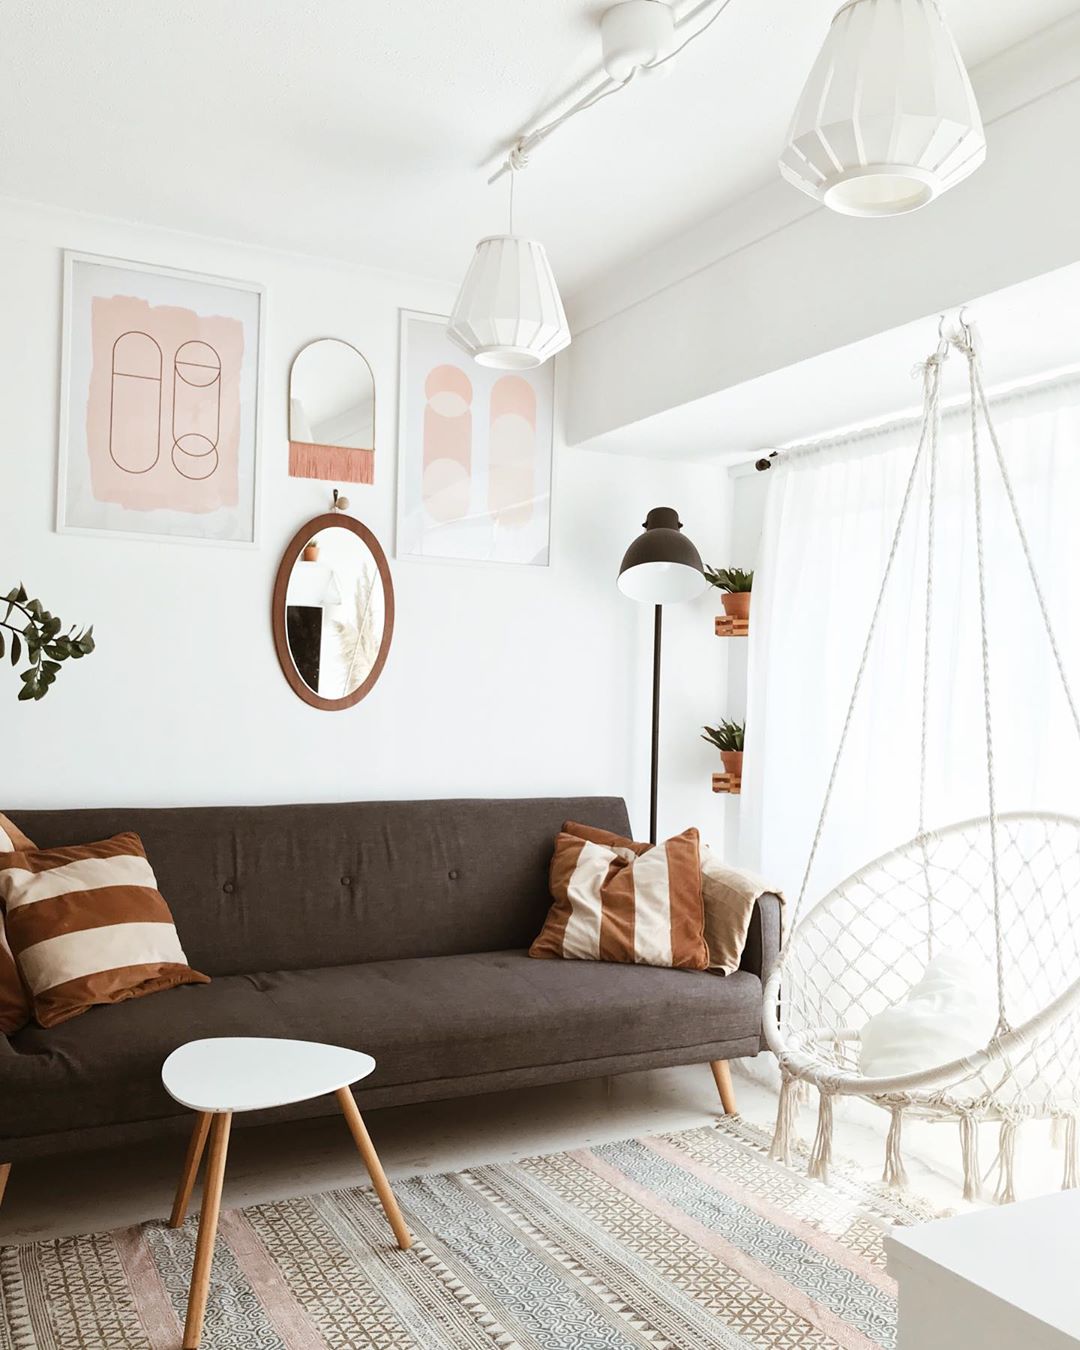 White-painted living room with brown couch and white chair hanging in corner. Photo by Instagram user @mady_mom